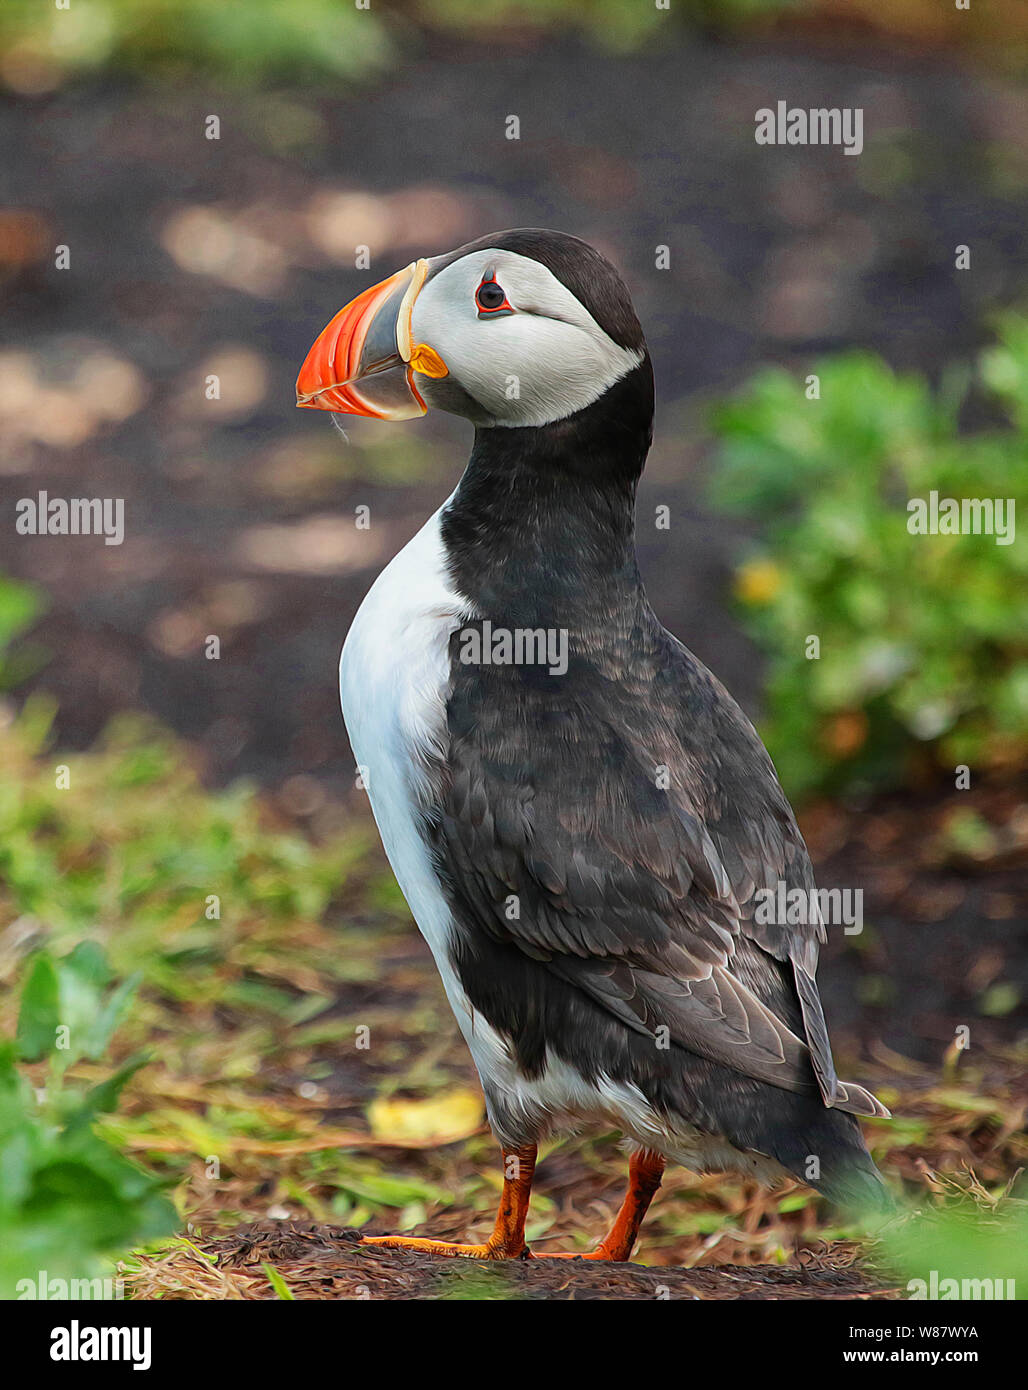 Atlantic Puffin (fratercula arctica), Farne Islands, Great Britiain (UK). A magical place with the skies filled with literally thousands of birds. Stock Photo